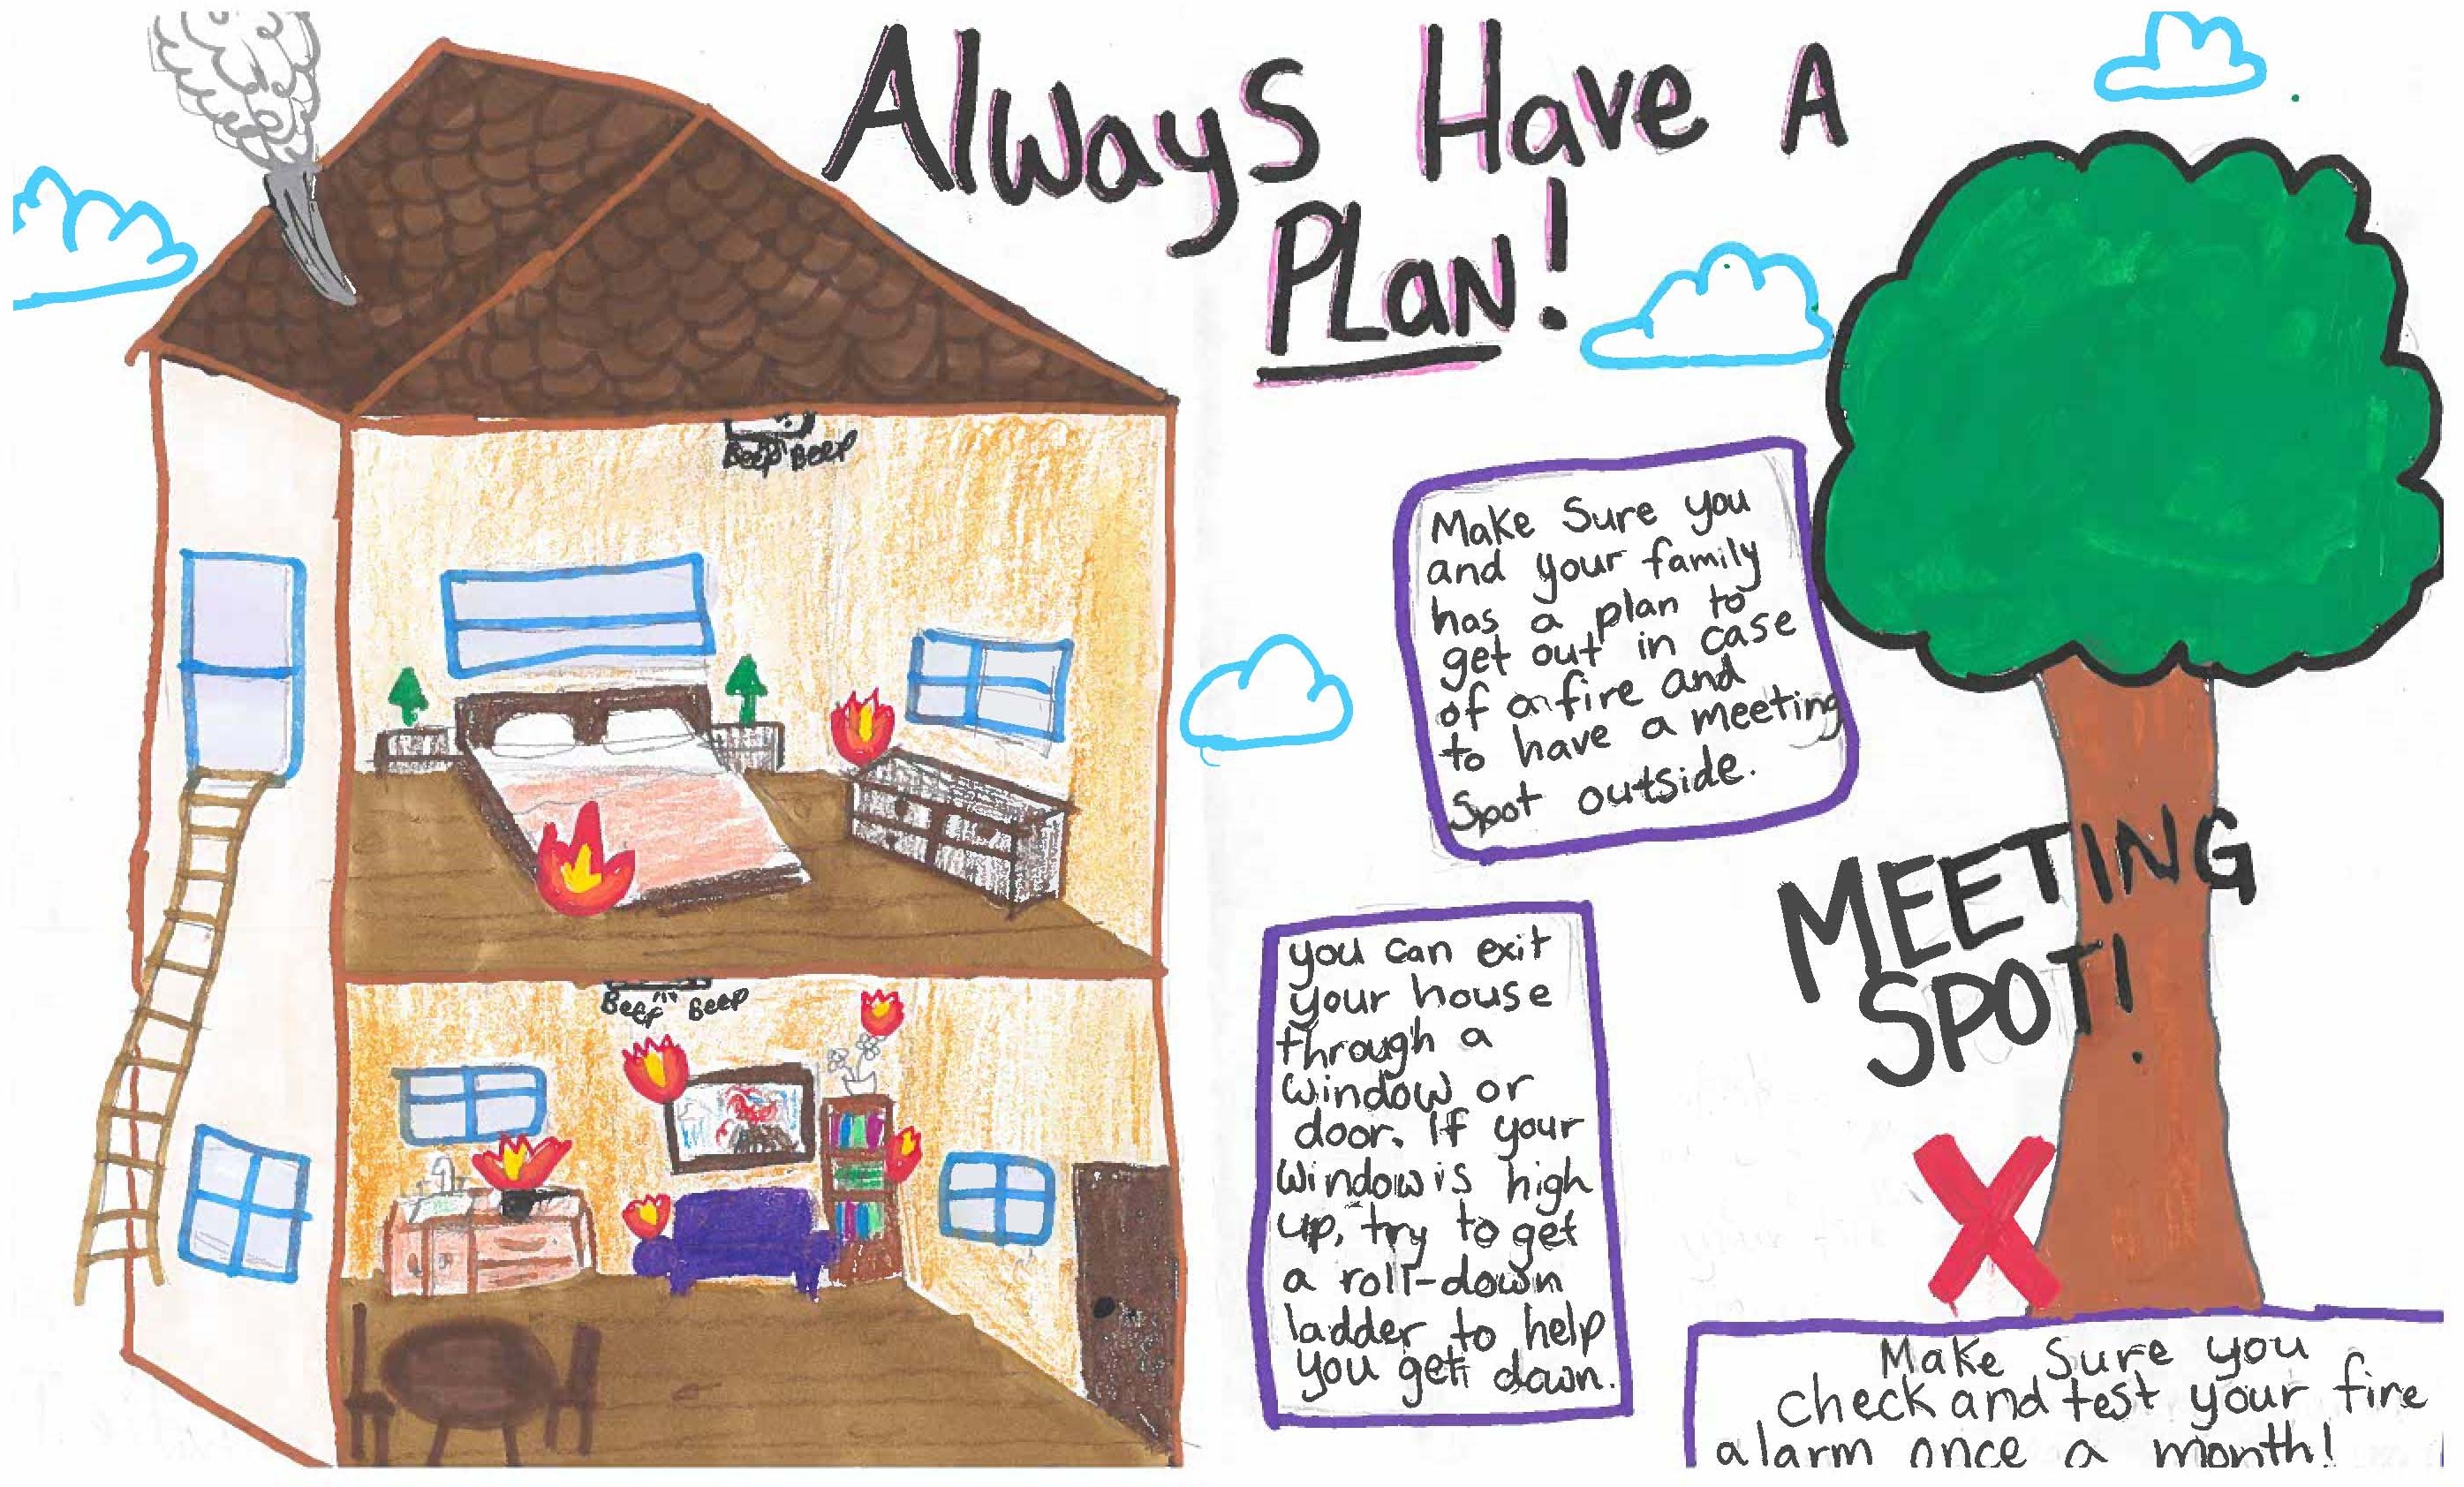 2022 Fire Prevention Week poster contest winning entry - "Always have a plan!" along the top with the image of a home on fire, escape ladder from 2nd storey, large deciduous tree beside the house with a red x to mark the meeting spot. Directions for safe escape appear in box on the poster: "Make sure you and your family has a plan to get out in case of a fire and to have a meeting spot outside", "You can exit your house through a window or door. If your window is high up try to get a roll-down ladder to help get you down" and "Make sure you check and test your fire alarm once a month."